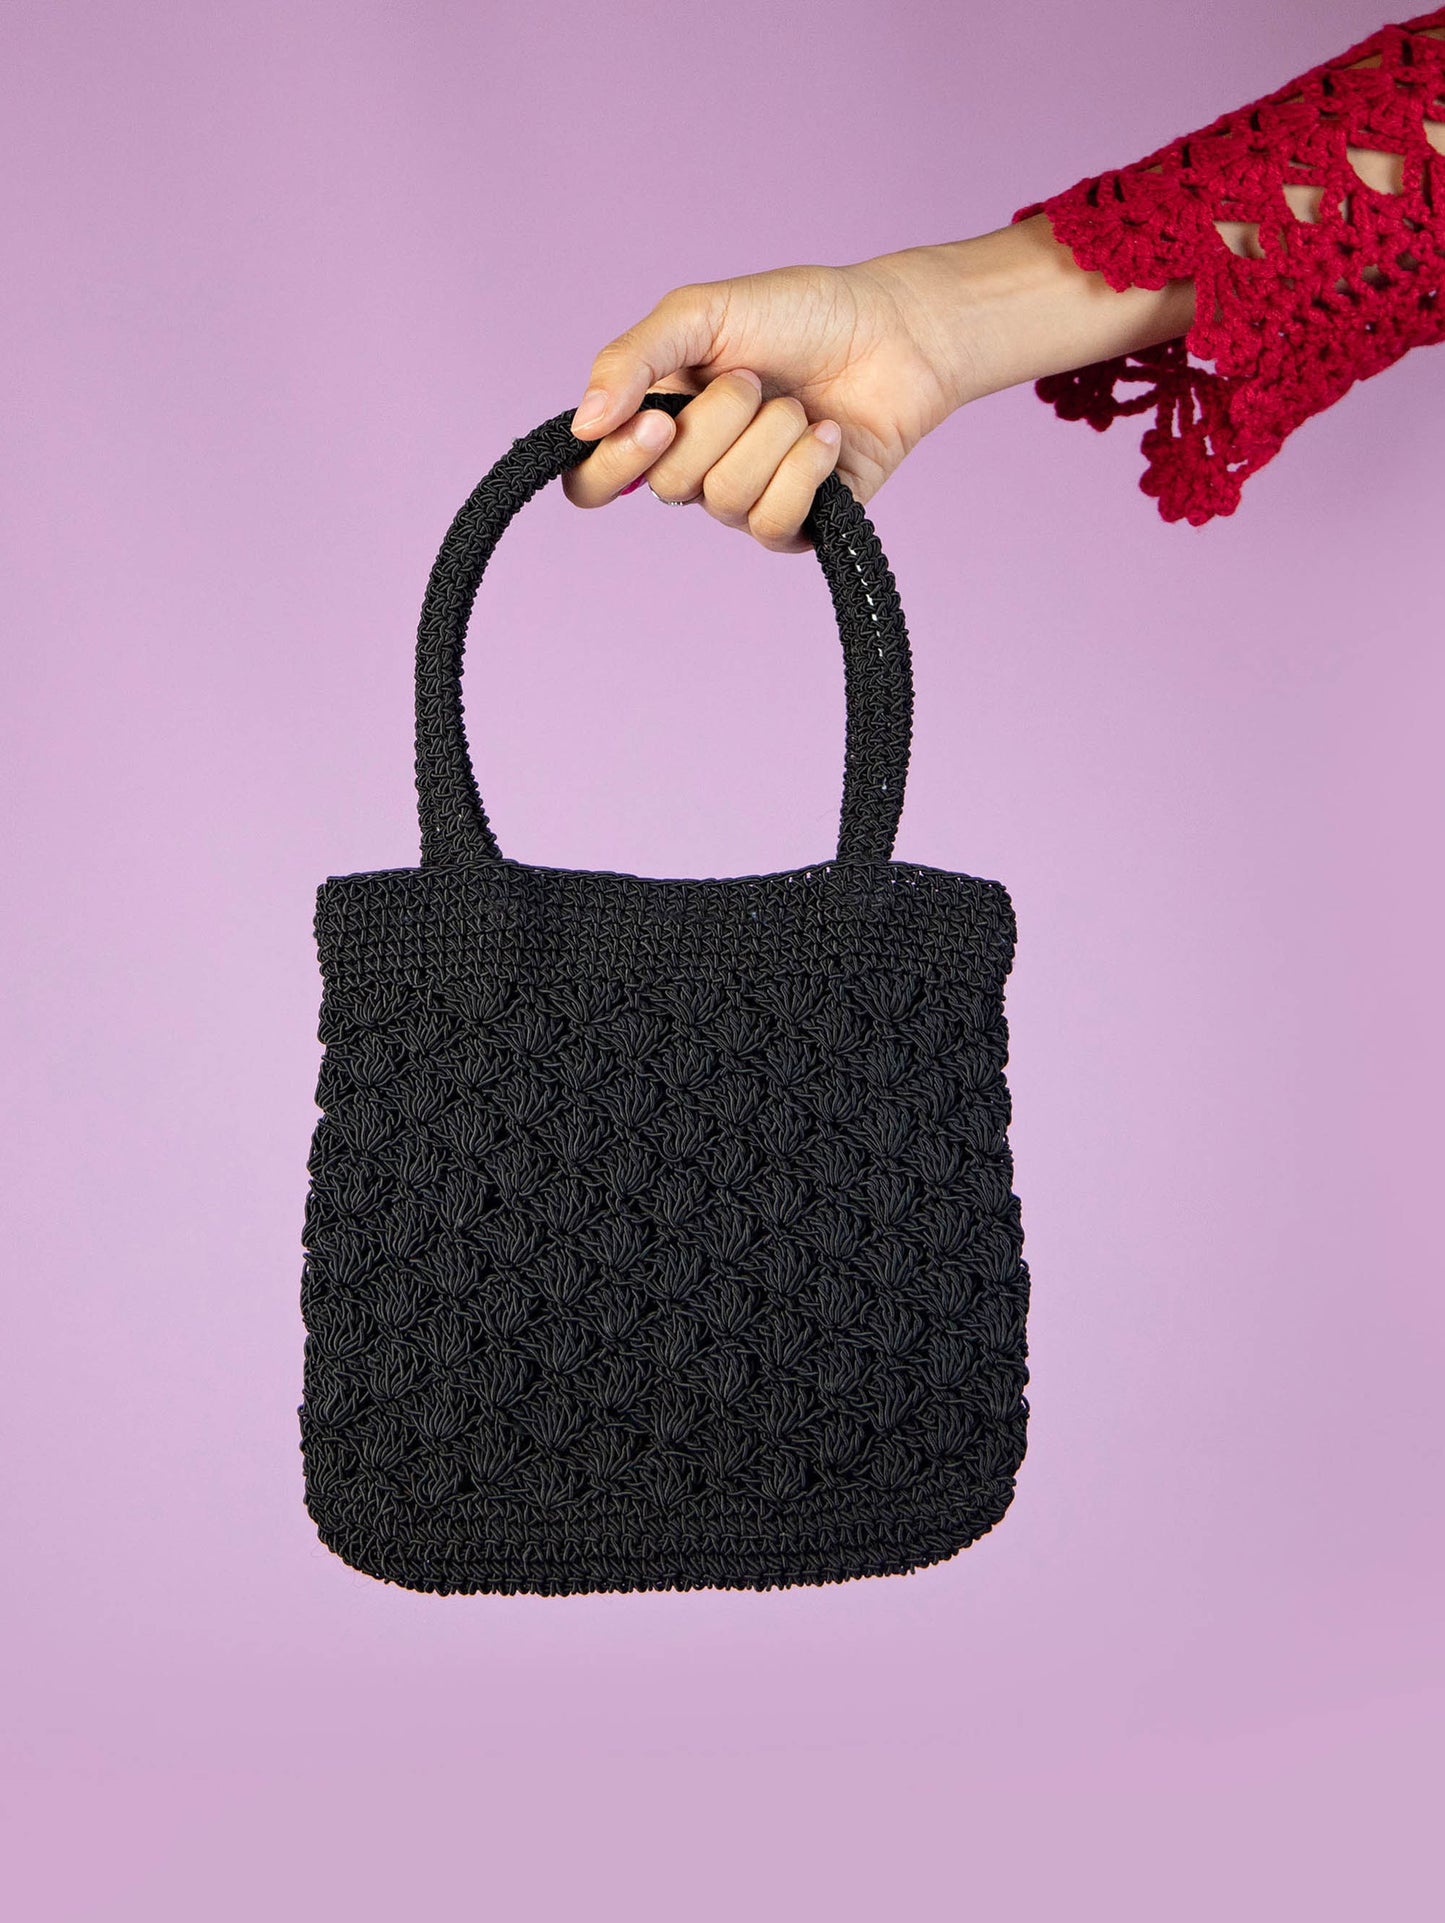 The Y2K Black Crochet Mini Bag is a vintage black handbag with a top handle, crafted in a crochet-style with a zipper closure. Super cute boho 2000s party mini bag.